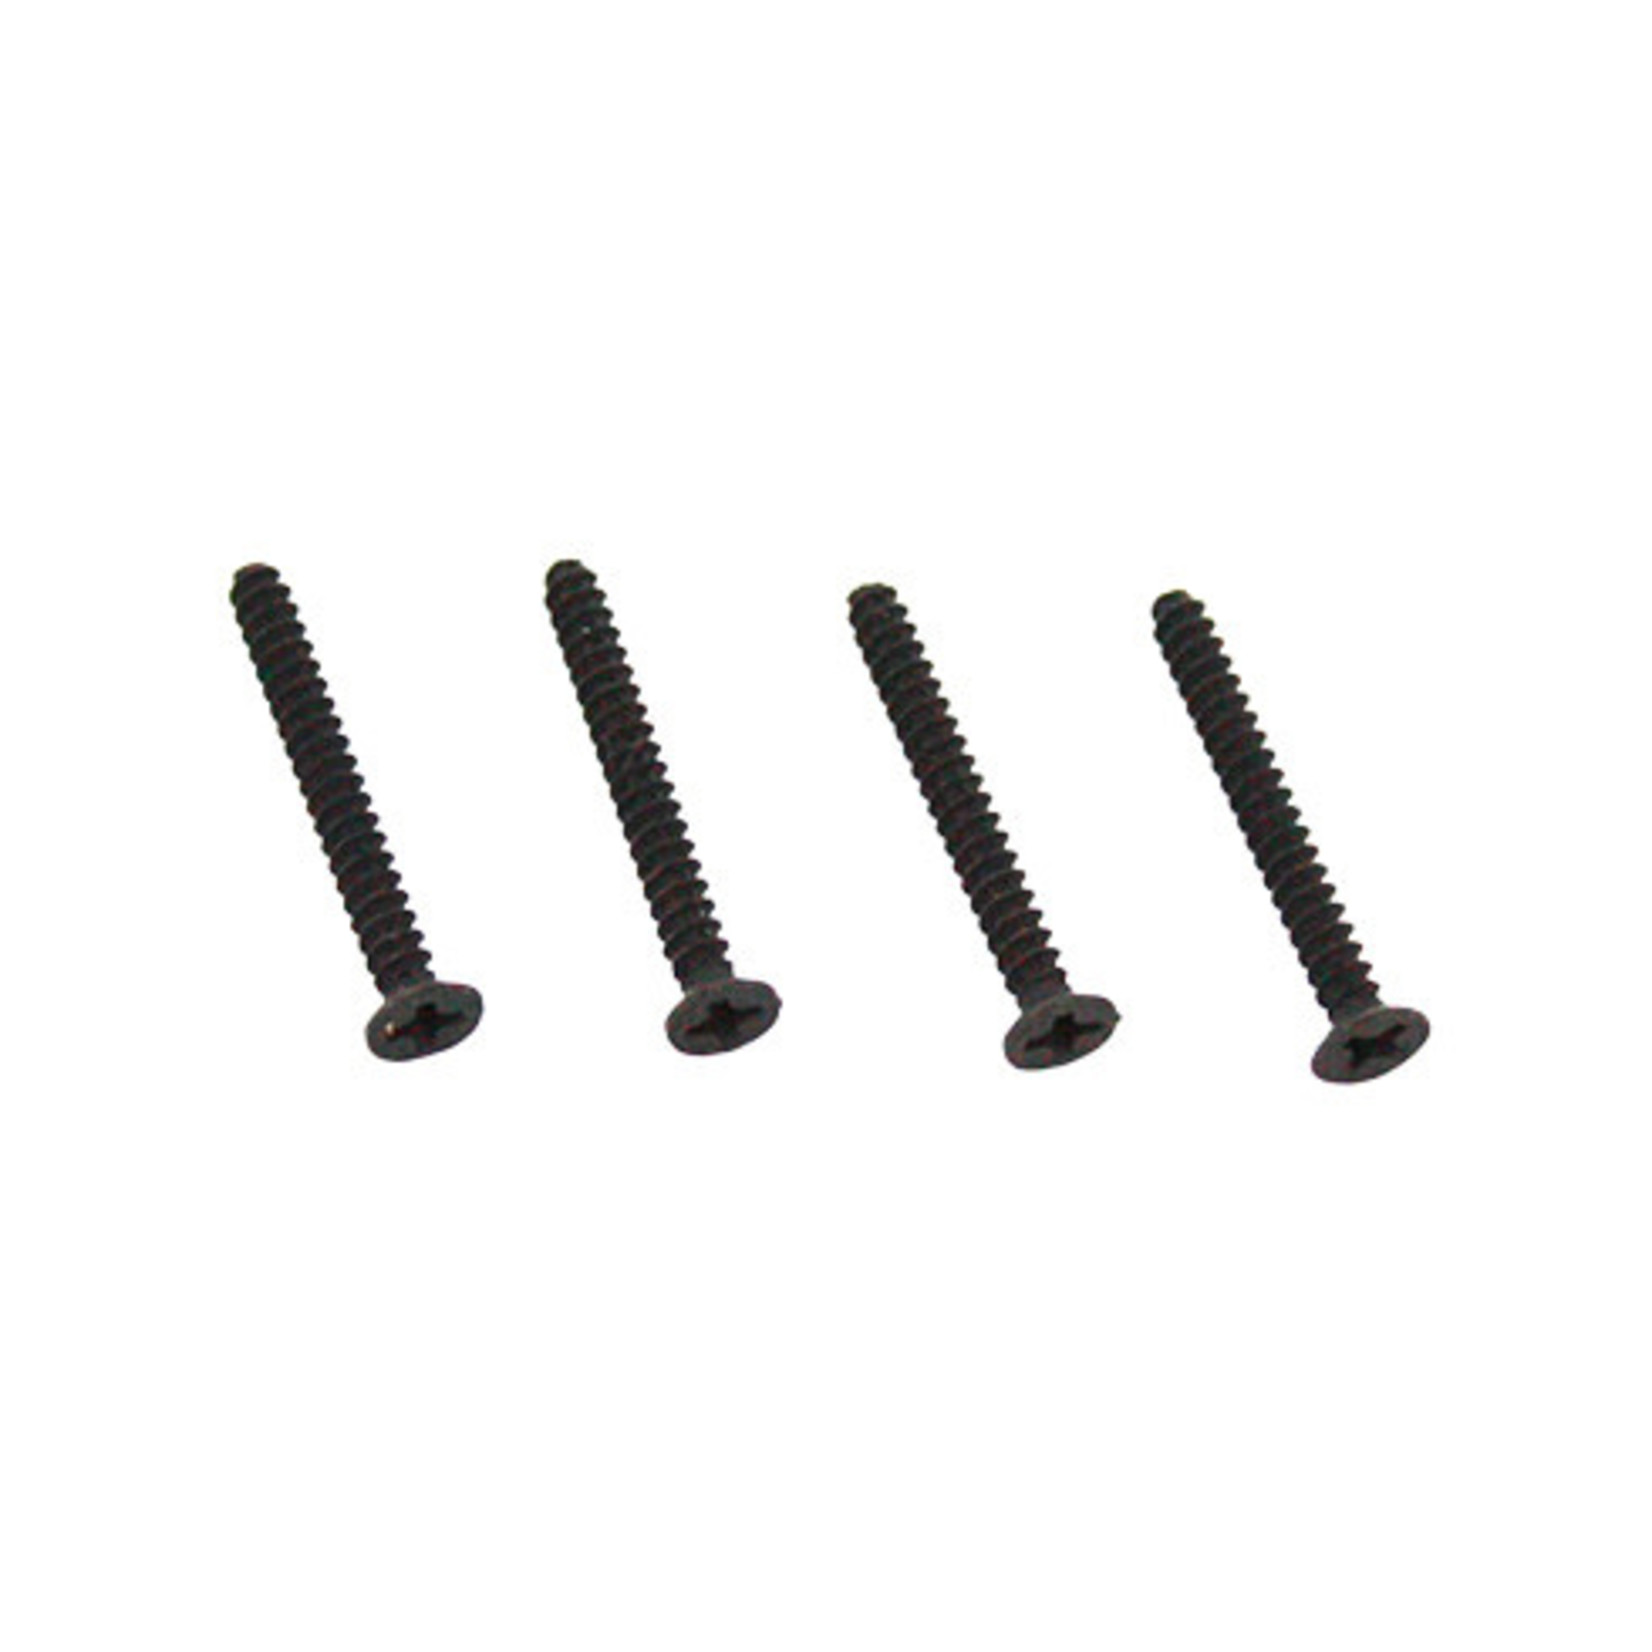 Redcat Racing 3x25mm Countersunk Phillips Self Tapping Screws (4pcs)